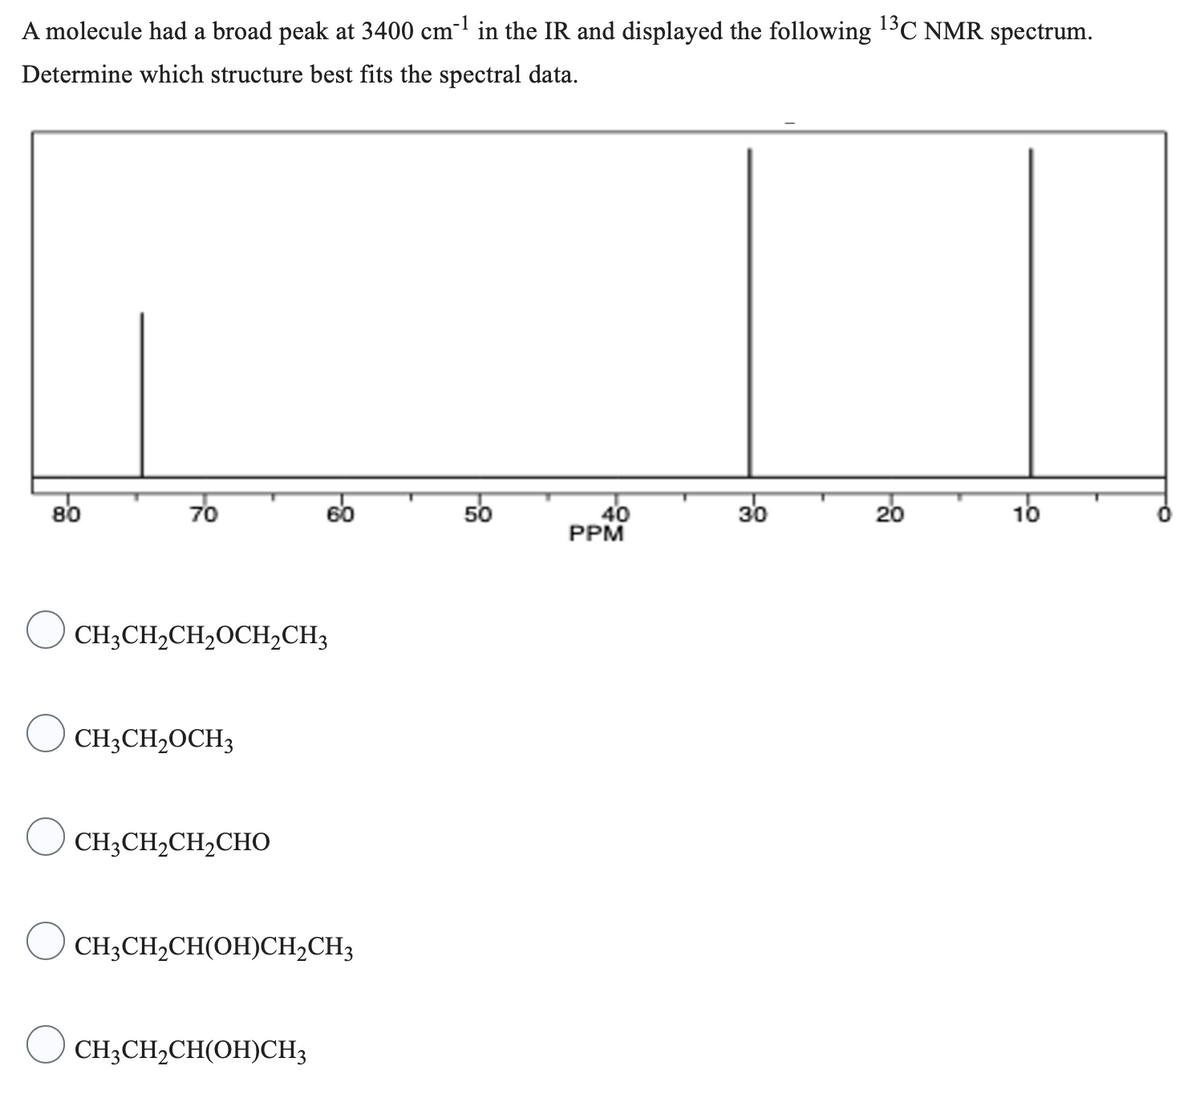 A molecule had a broad peak at 3400 cm-¹ in the IR and displayed the following ¹3C NMR spectrum.
Determine which structure best fits the spectral data.
80
70
CH3CH₂CH₂OCH₂CH3
CH3CH₂OCH3
CH3CH,CH,CHO
CH3CH₂CH(OH)CH₂CH3
CH3CH₂CH(OH)CH3
50
40
PPM
30
20
10